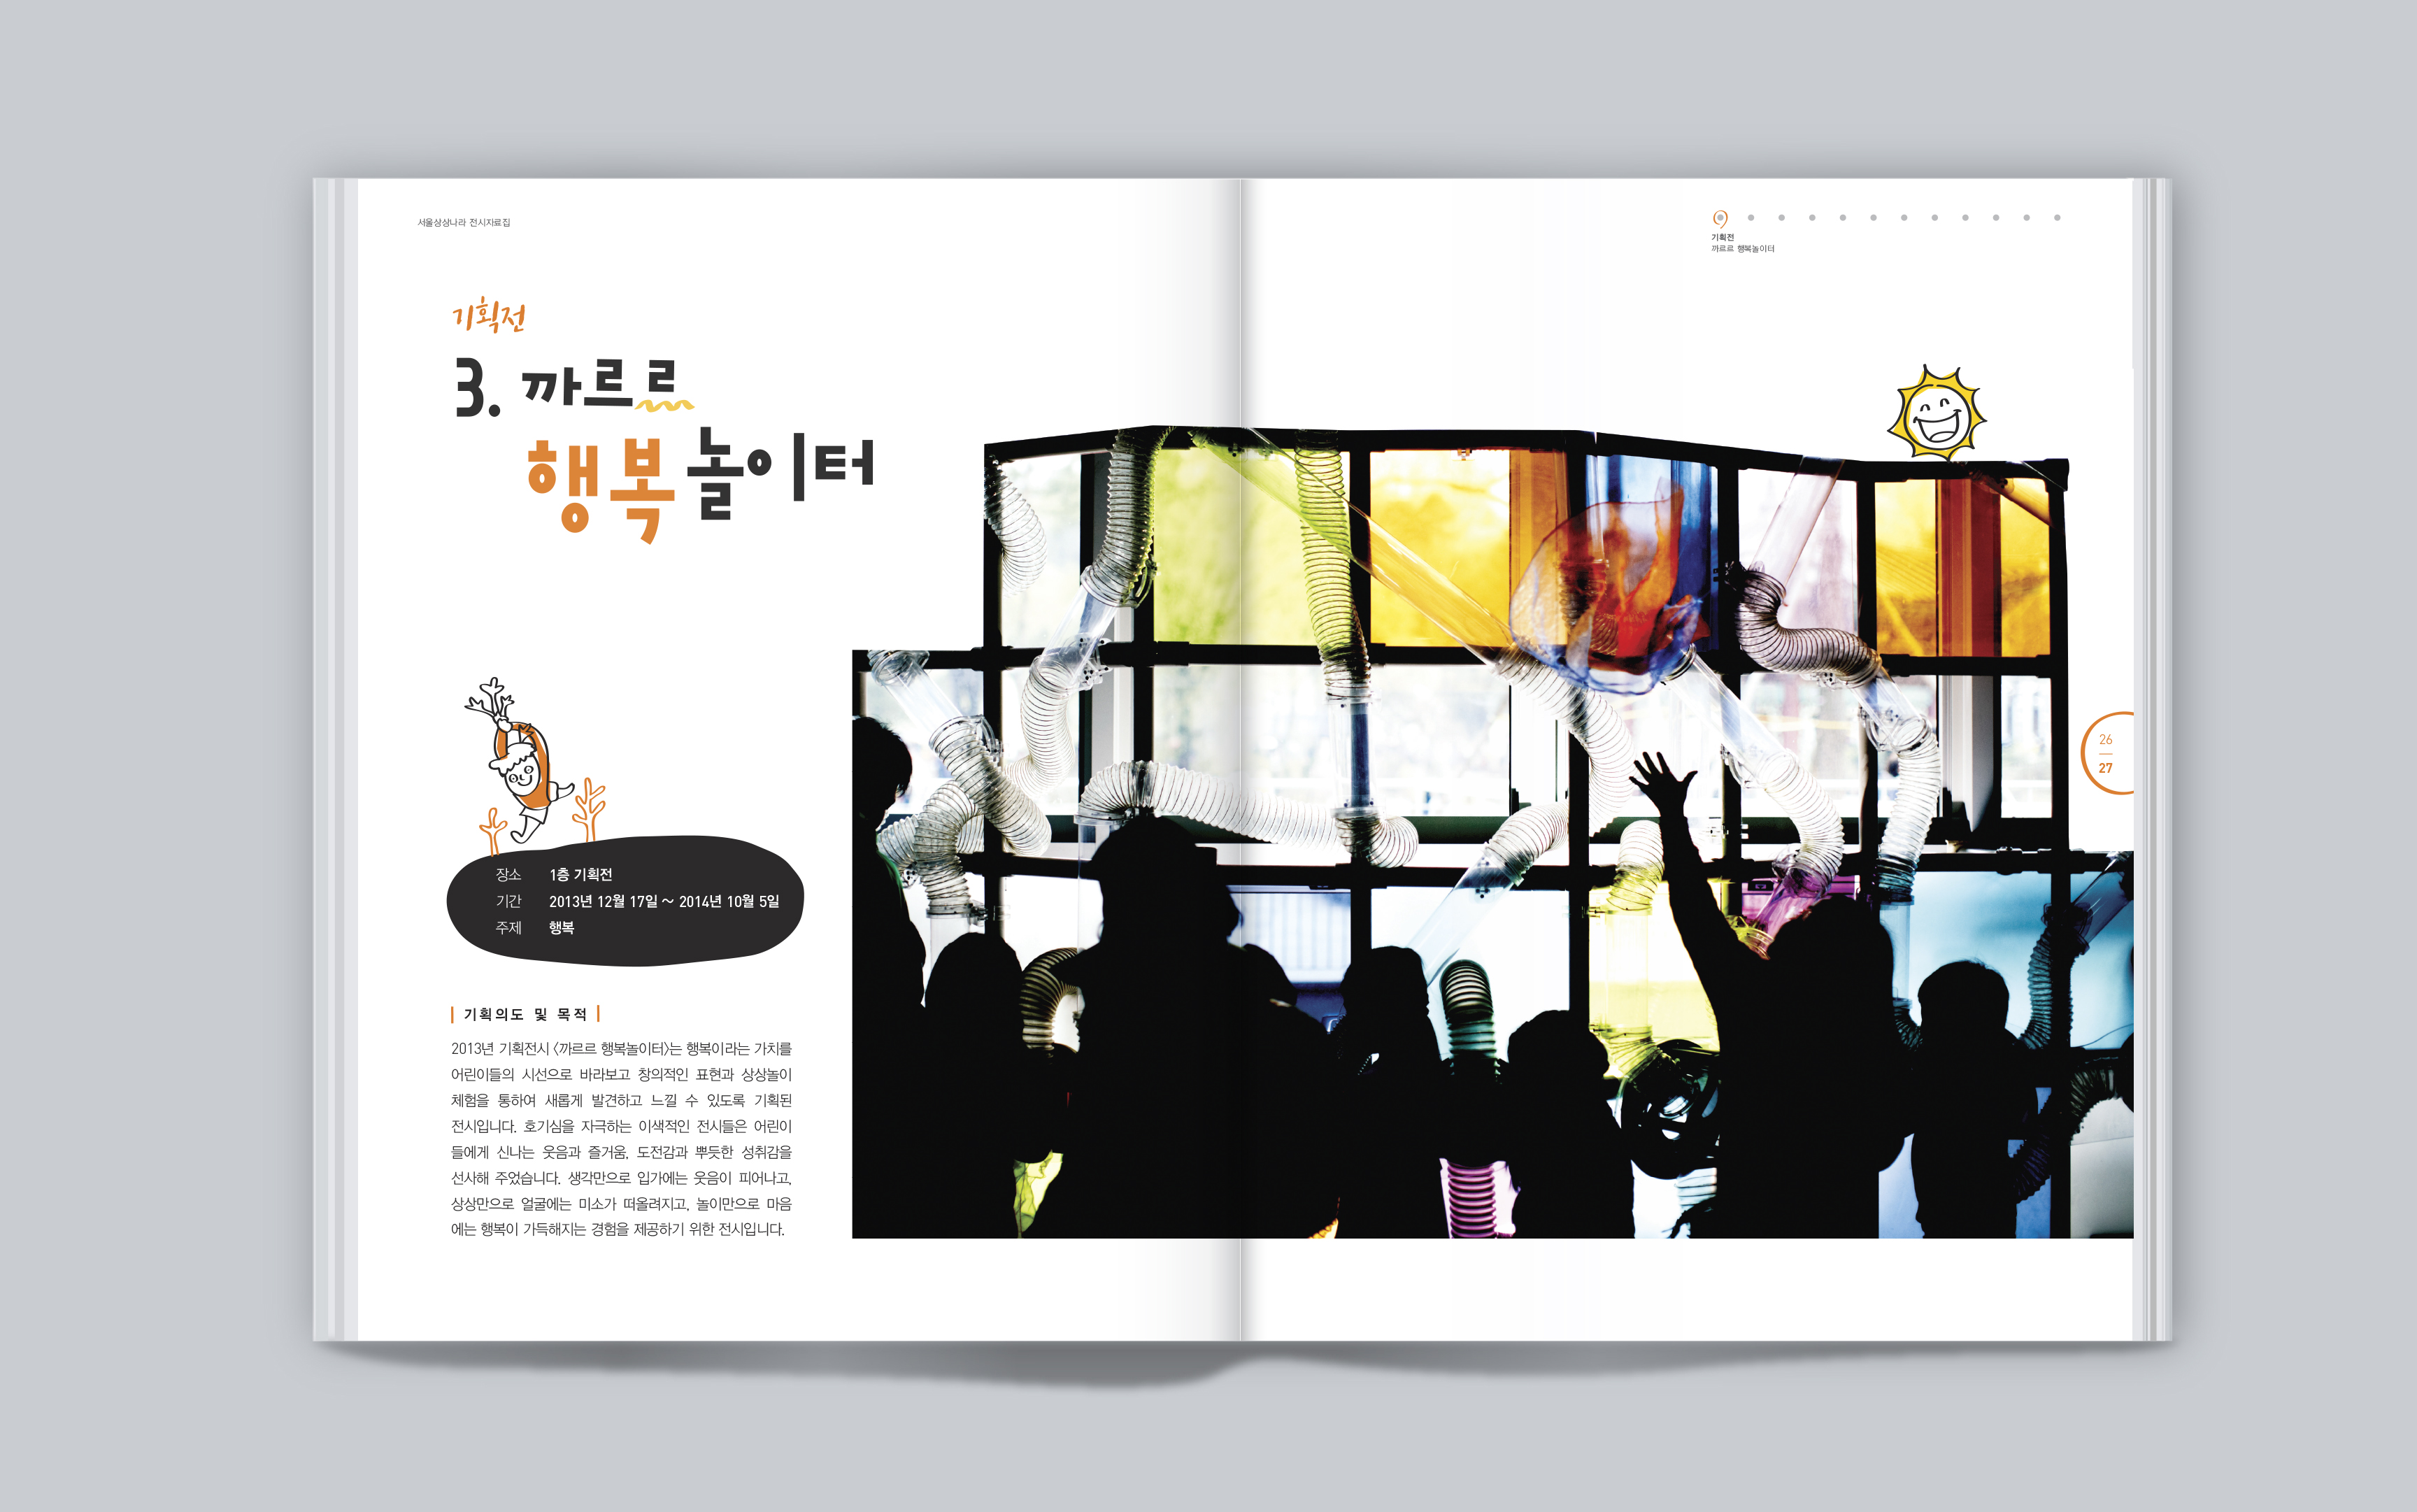 2016seoul childrens museum EX_pages1